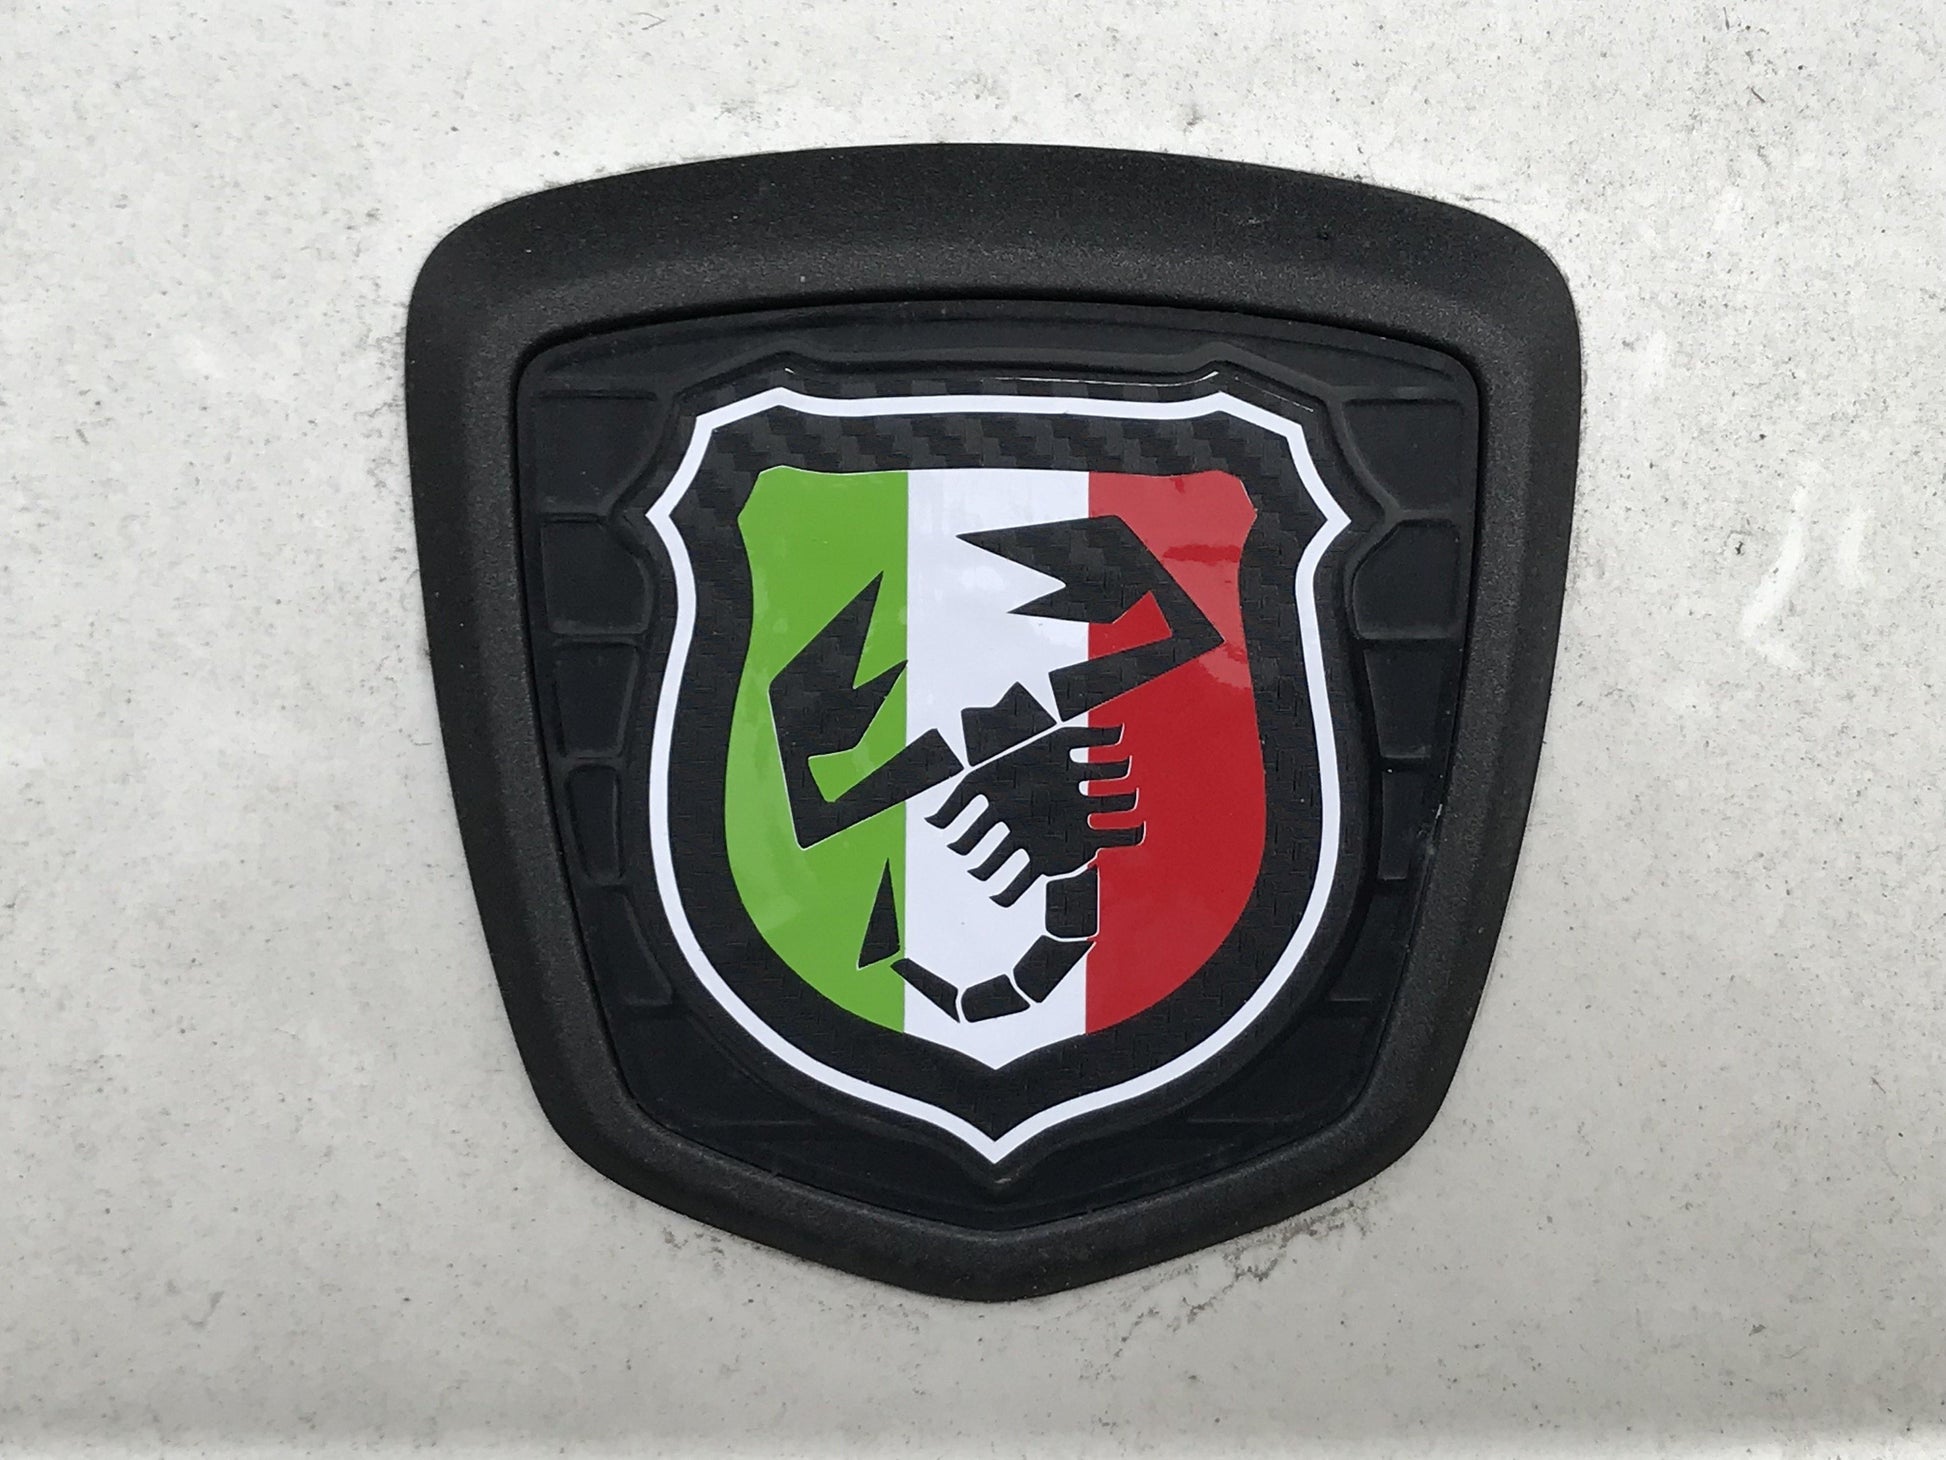 500/595 Tricolore Scorpion Badge overlays carbon option available. Set of two - Abarth Tuning